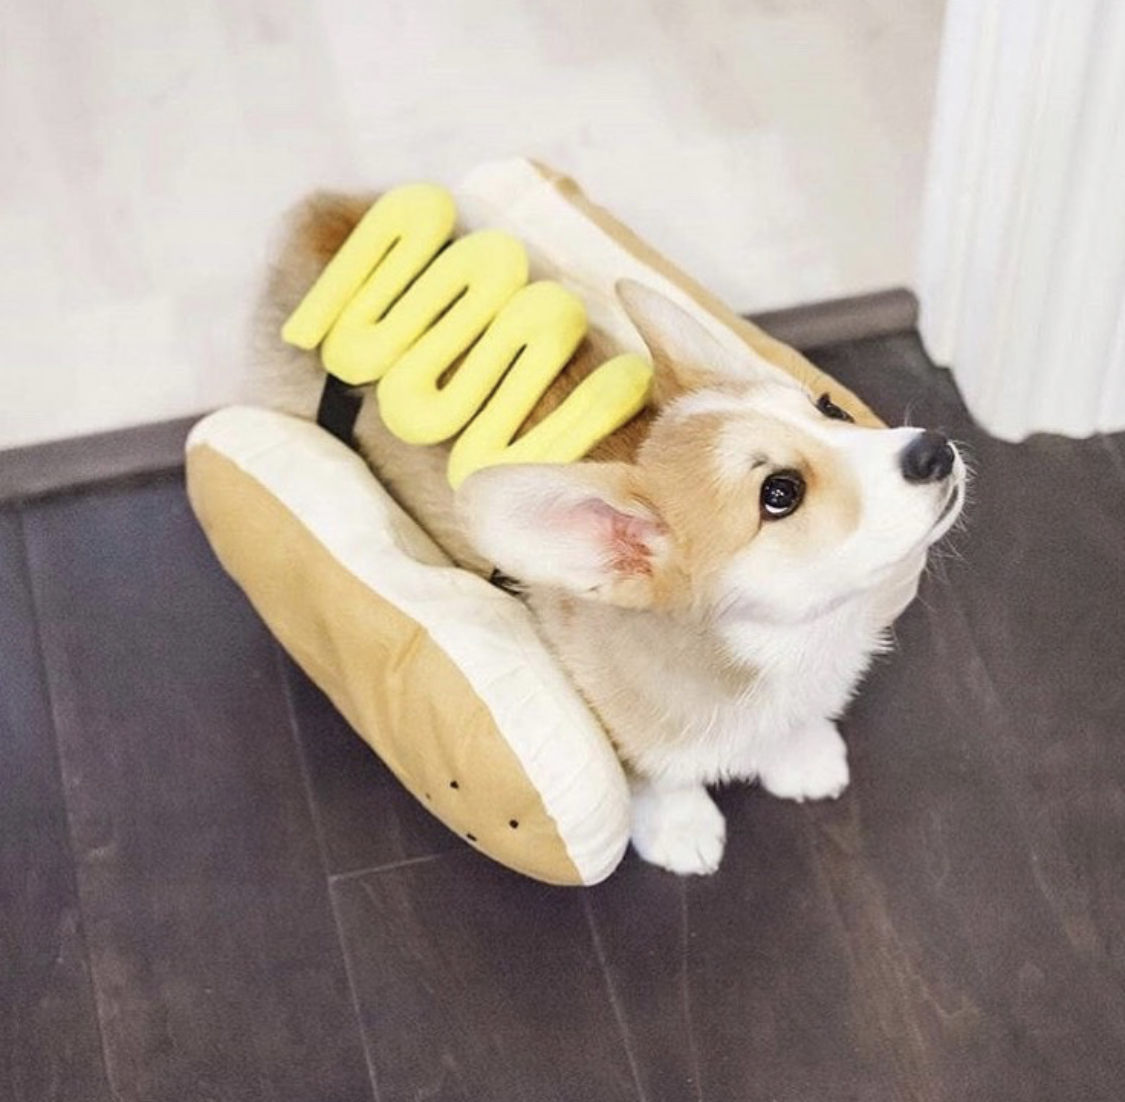 Corgi wearing a hotdog bun costume while standing on the floor and looking up